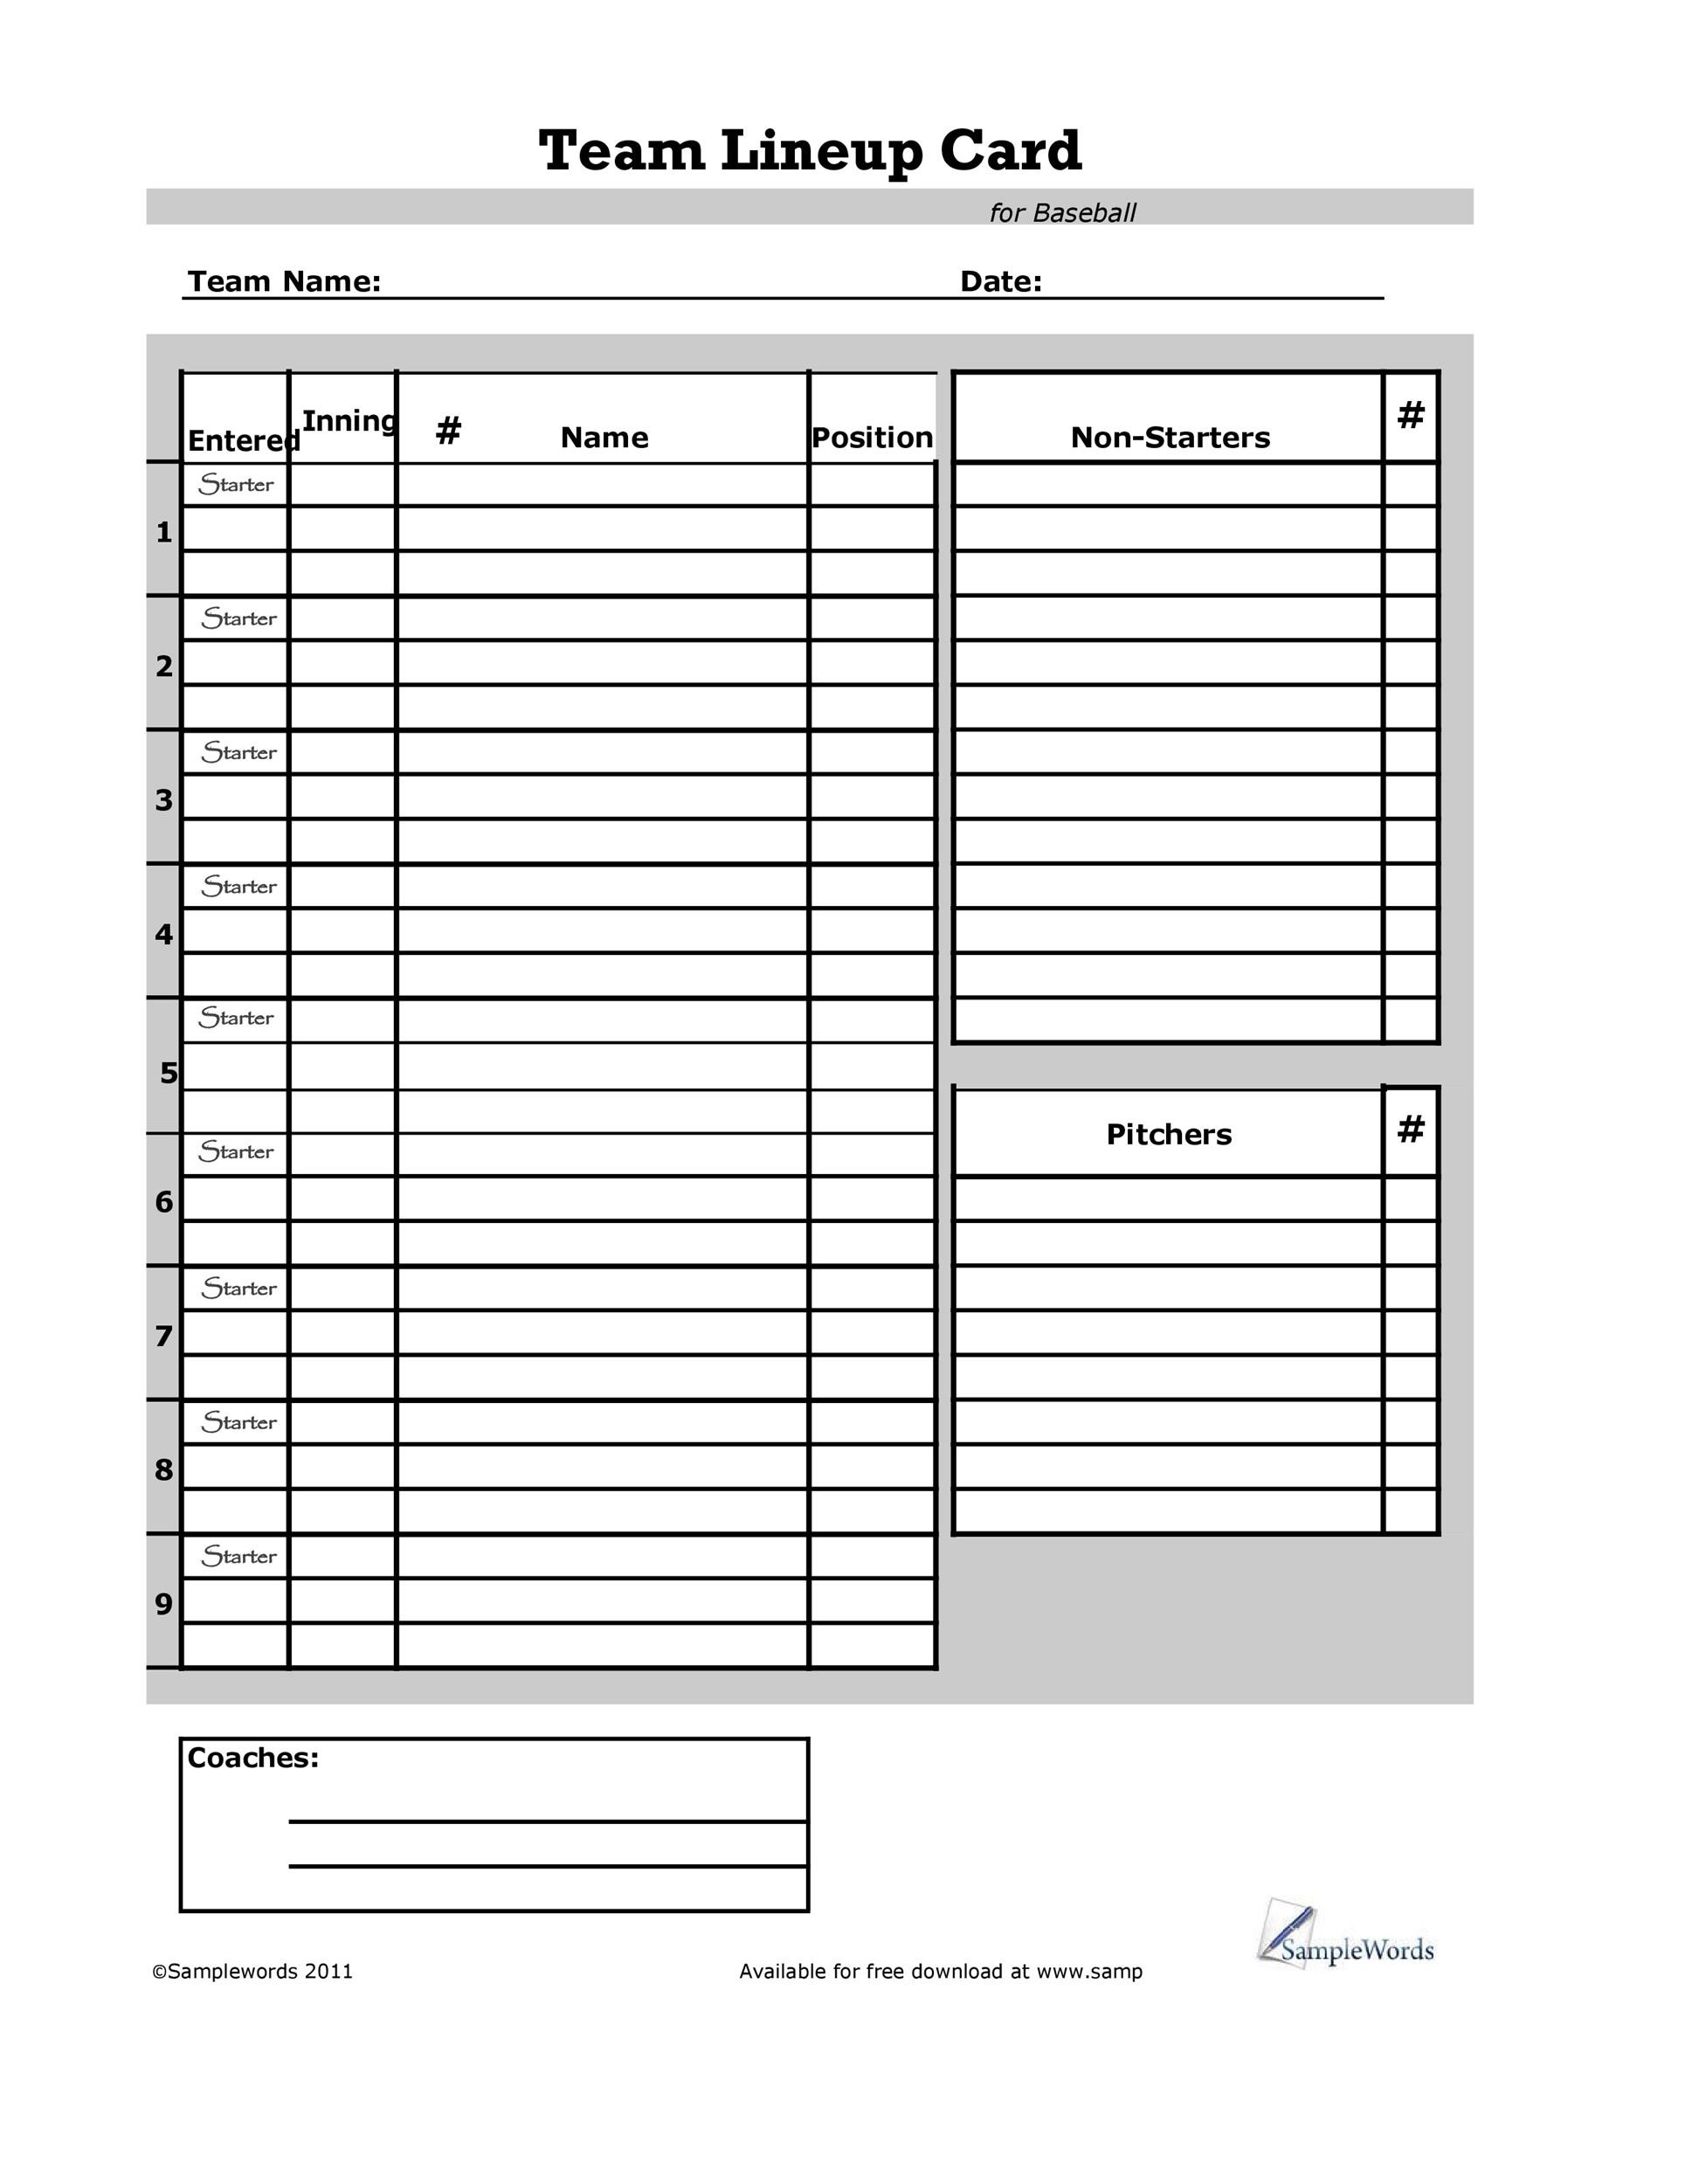 View 22 Inning Baseball Lineup Template Background : Fill, Sign And Within Baseball Lineup Card Template